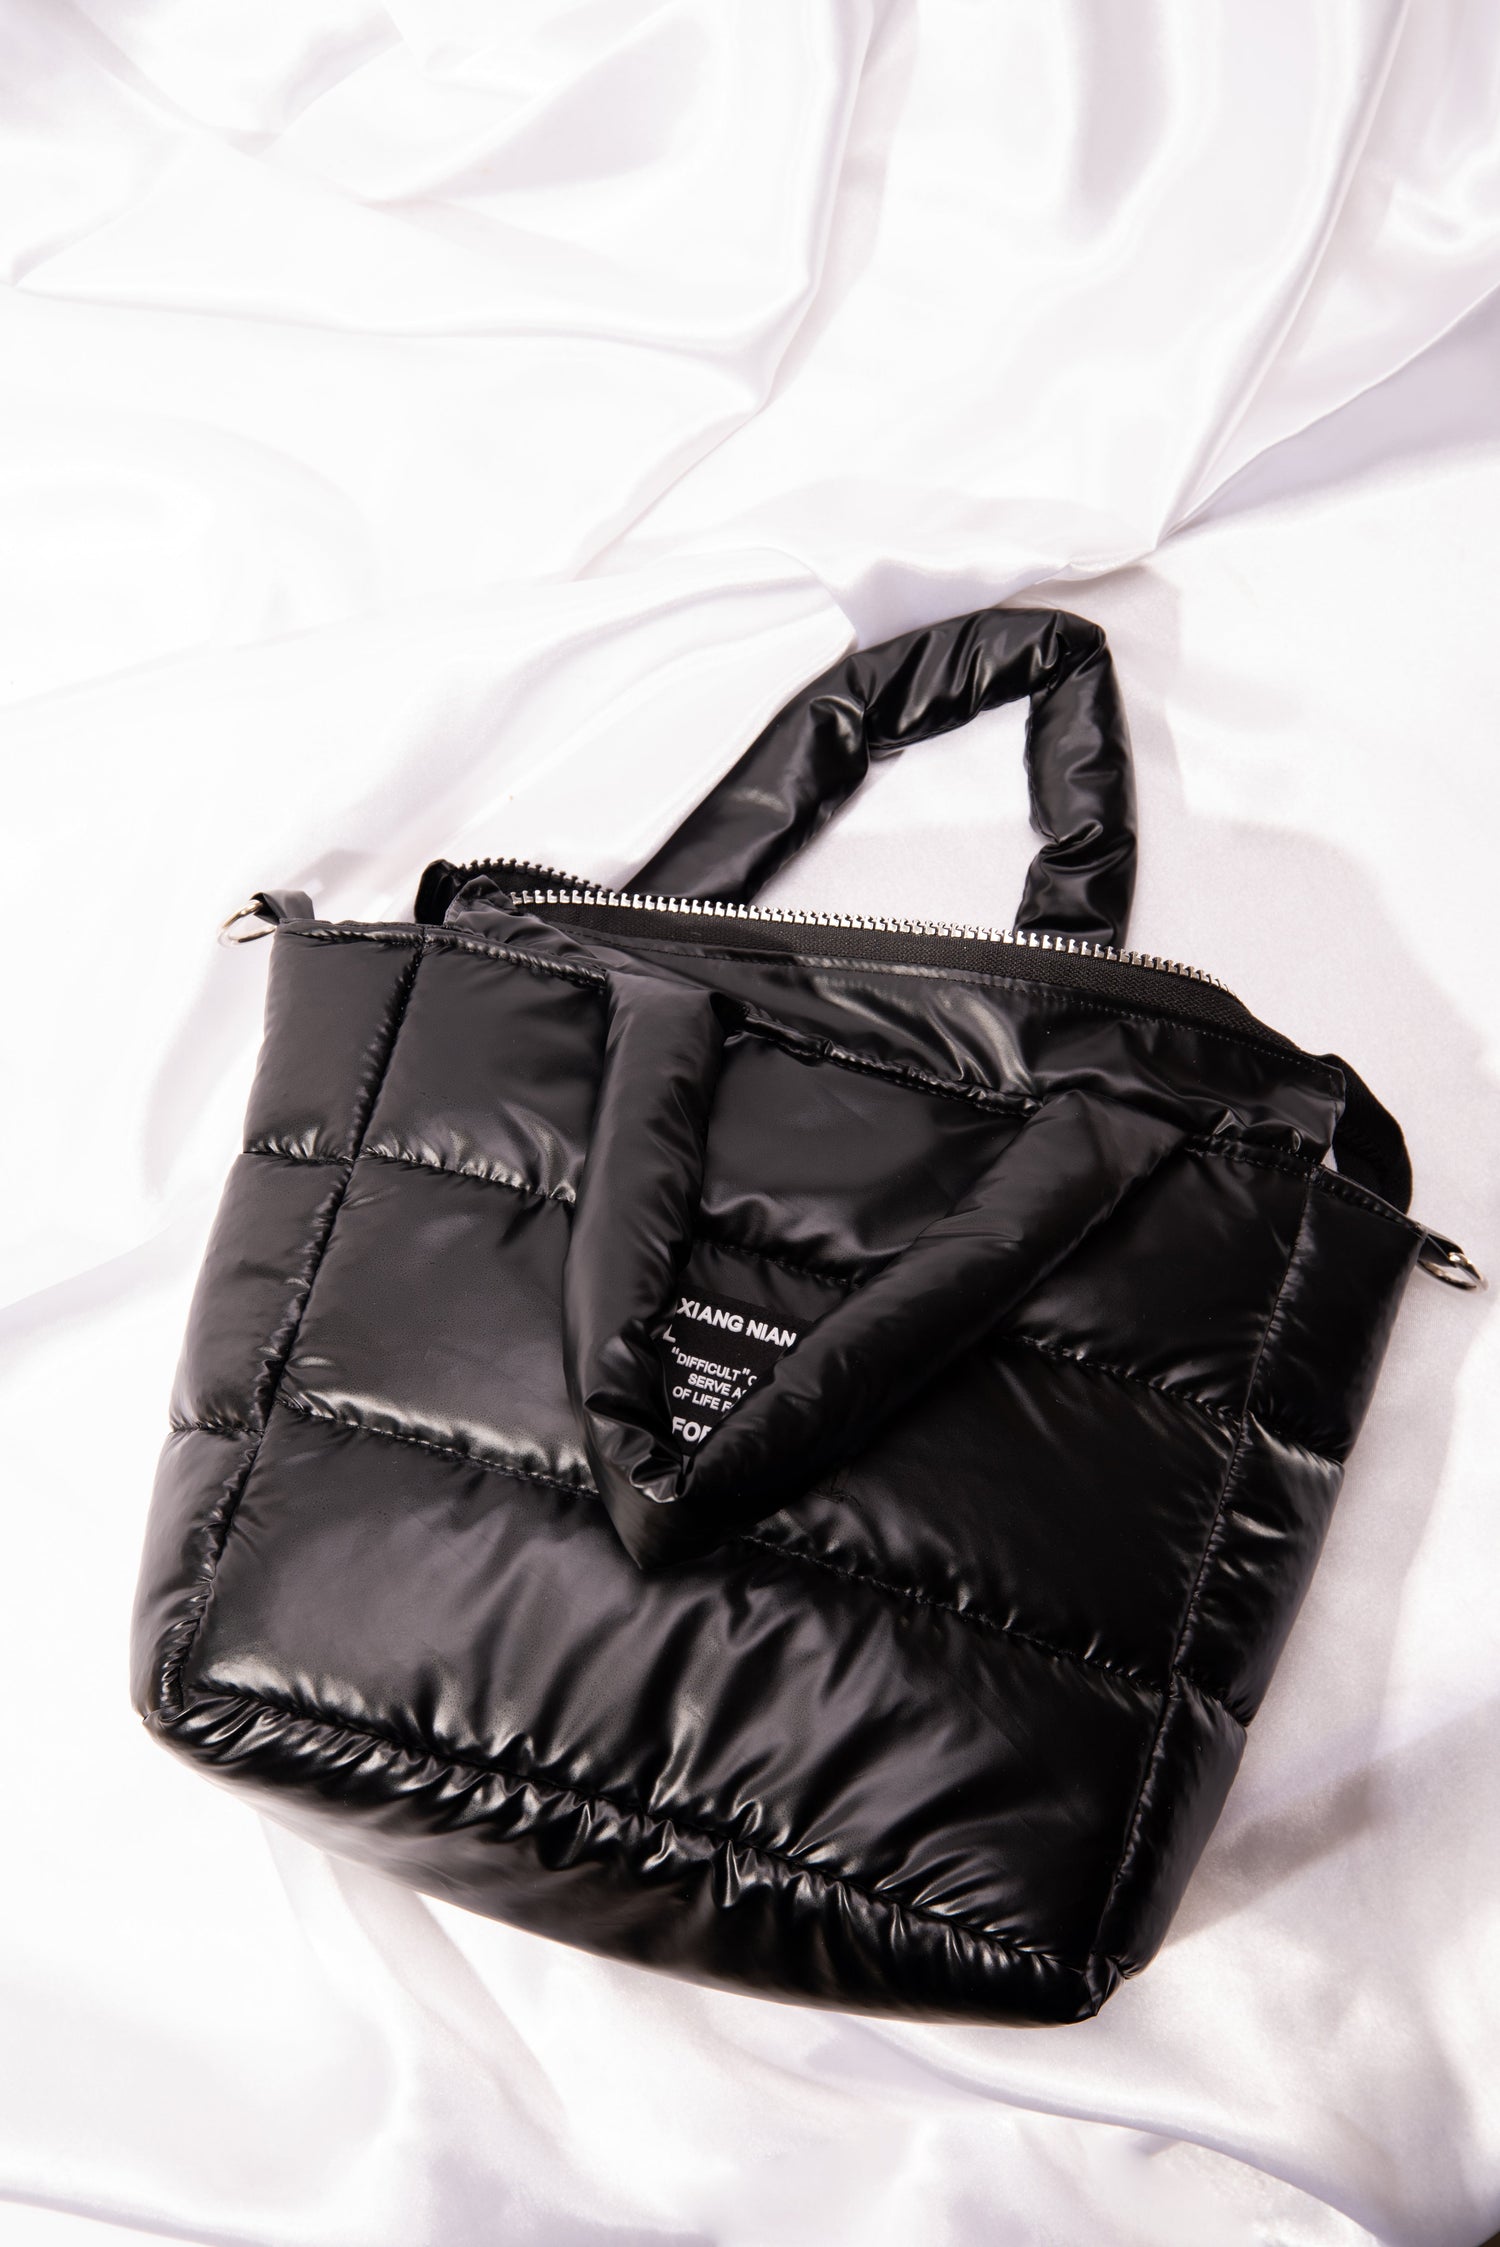 puffer bag for women is a handbag and cross body bag with a perineum design   